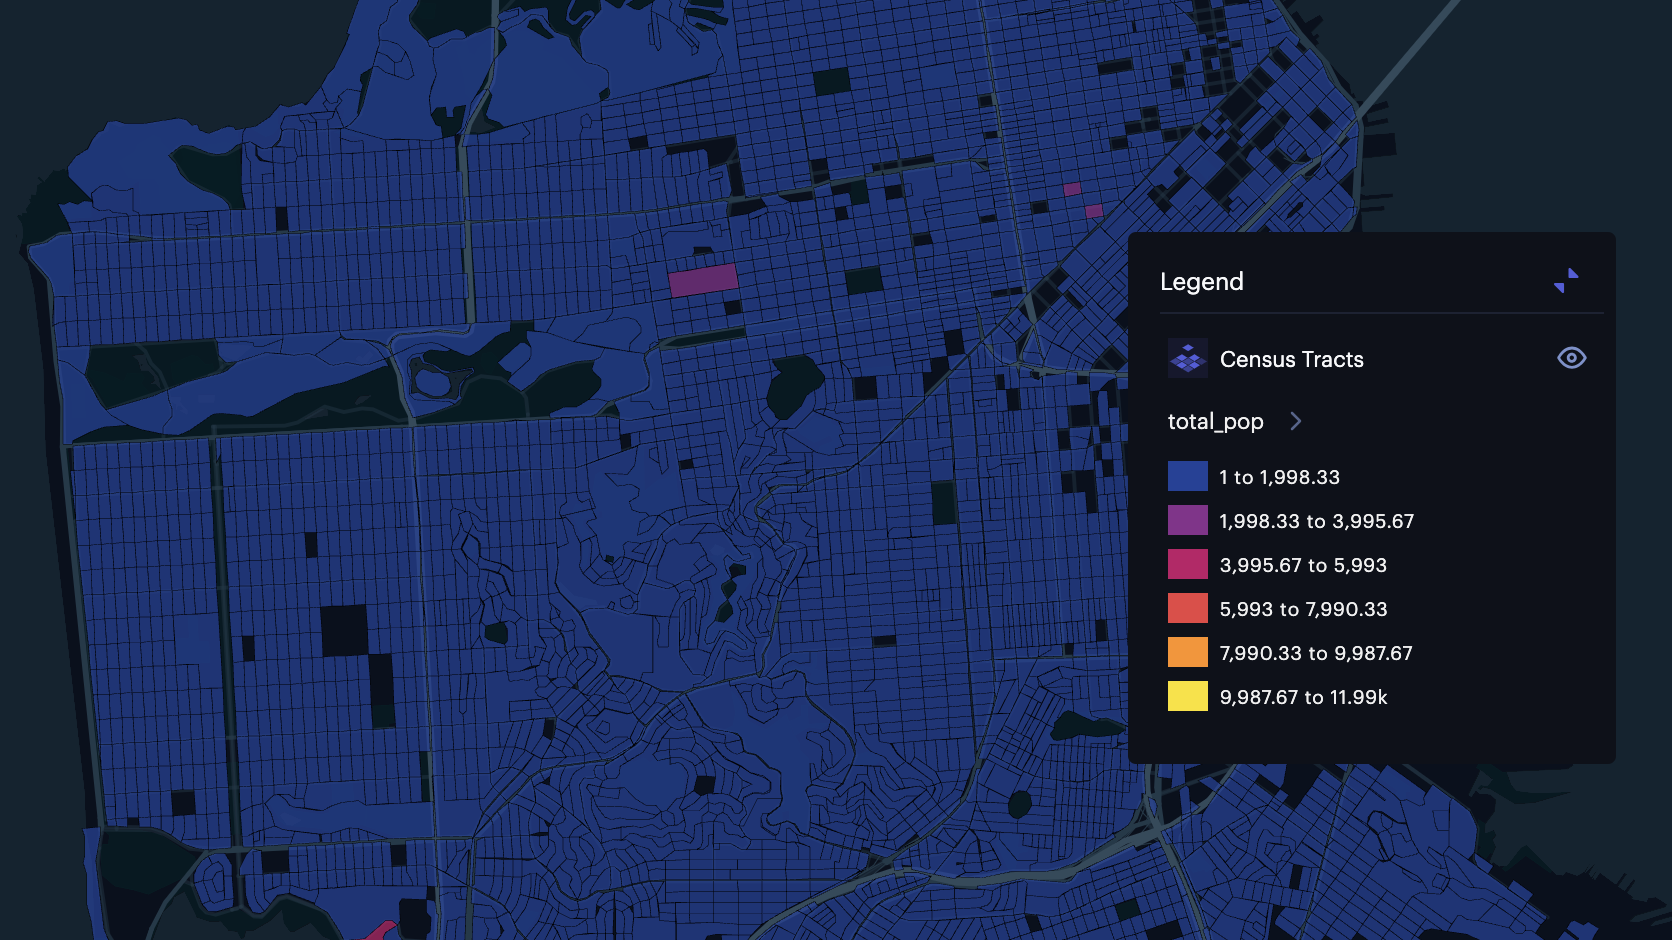 Census tracts in San Francisco (without a dynamic color scale).